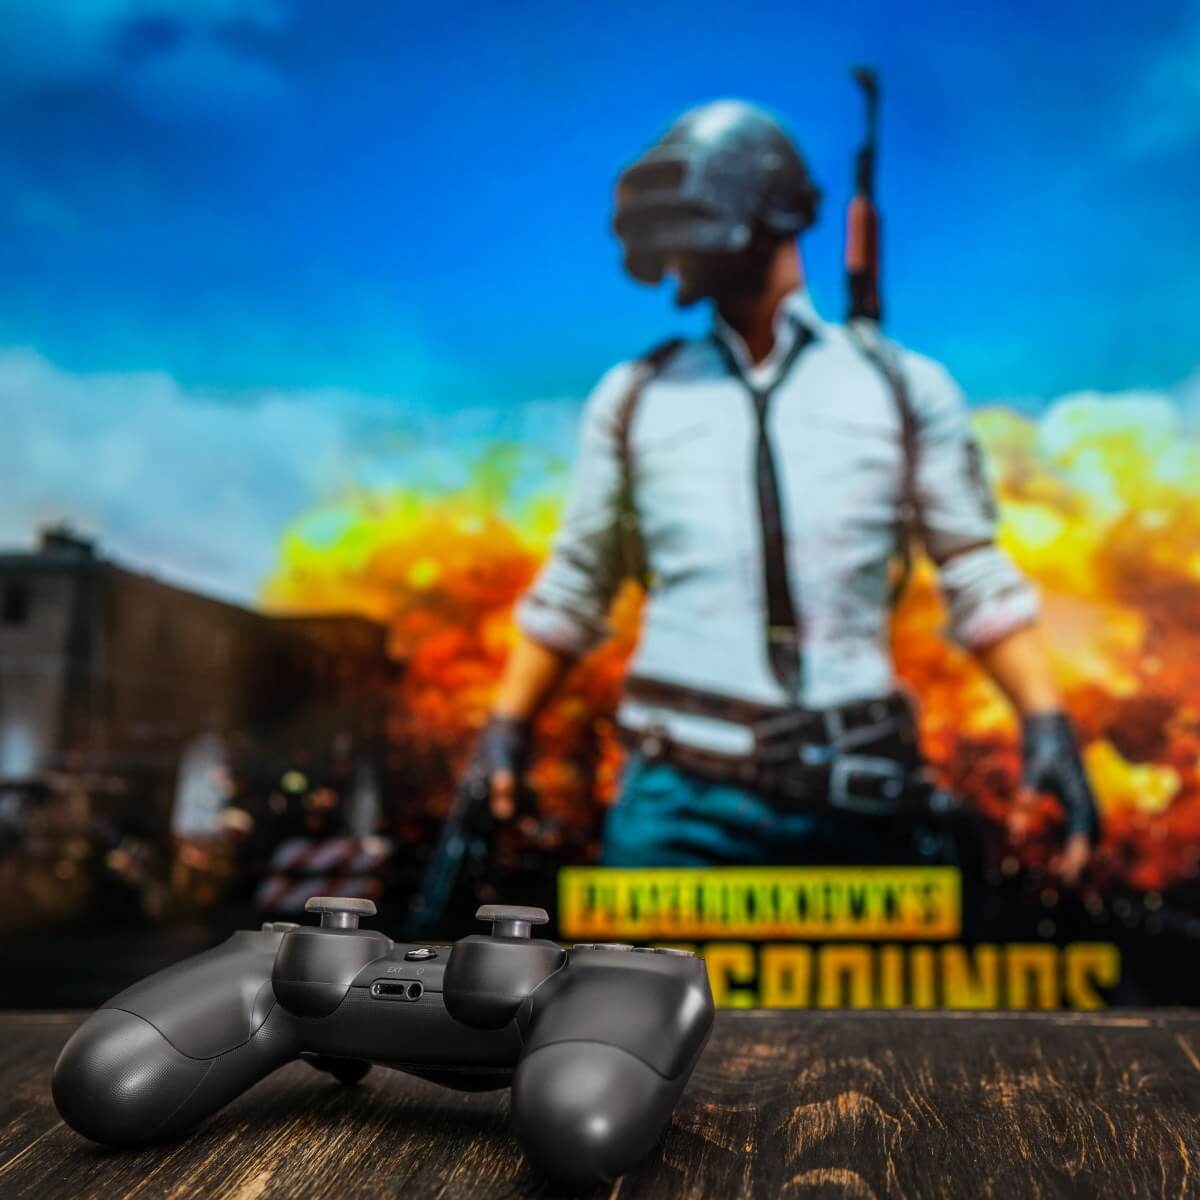 Verstikkend Luipaard Sloppenwijk PUBG packet loss: How to fix it [2023 Guide] [Complete Guide]